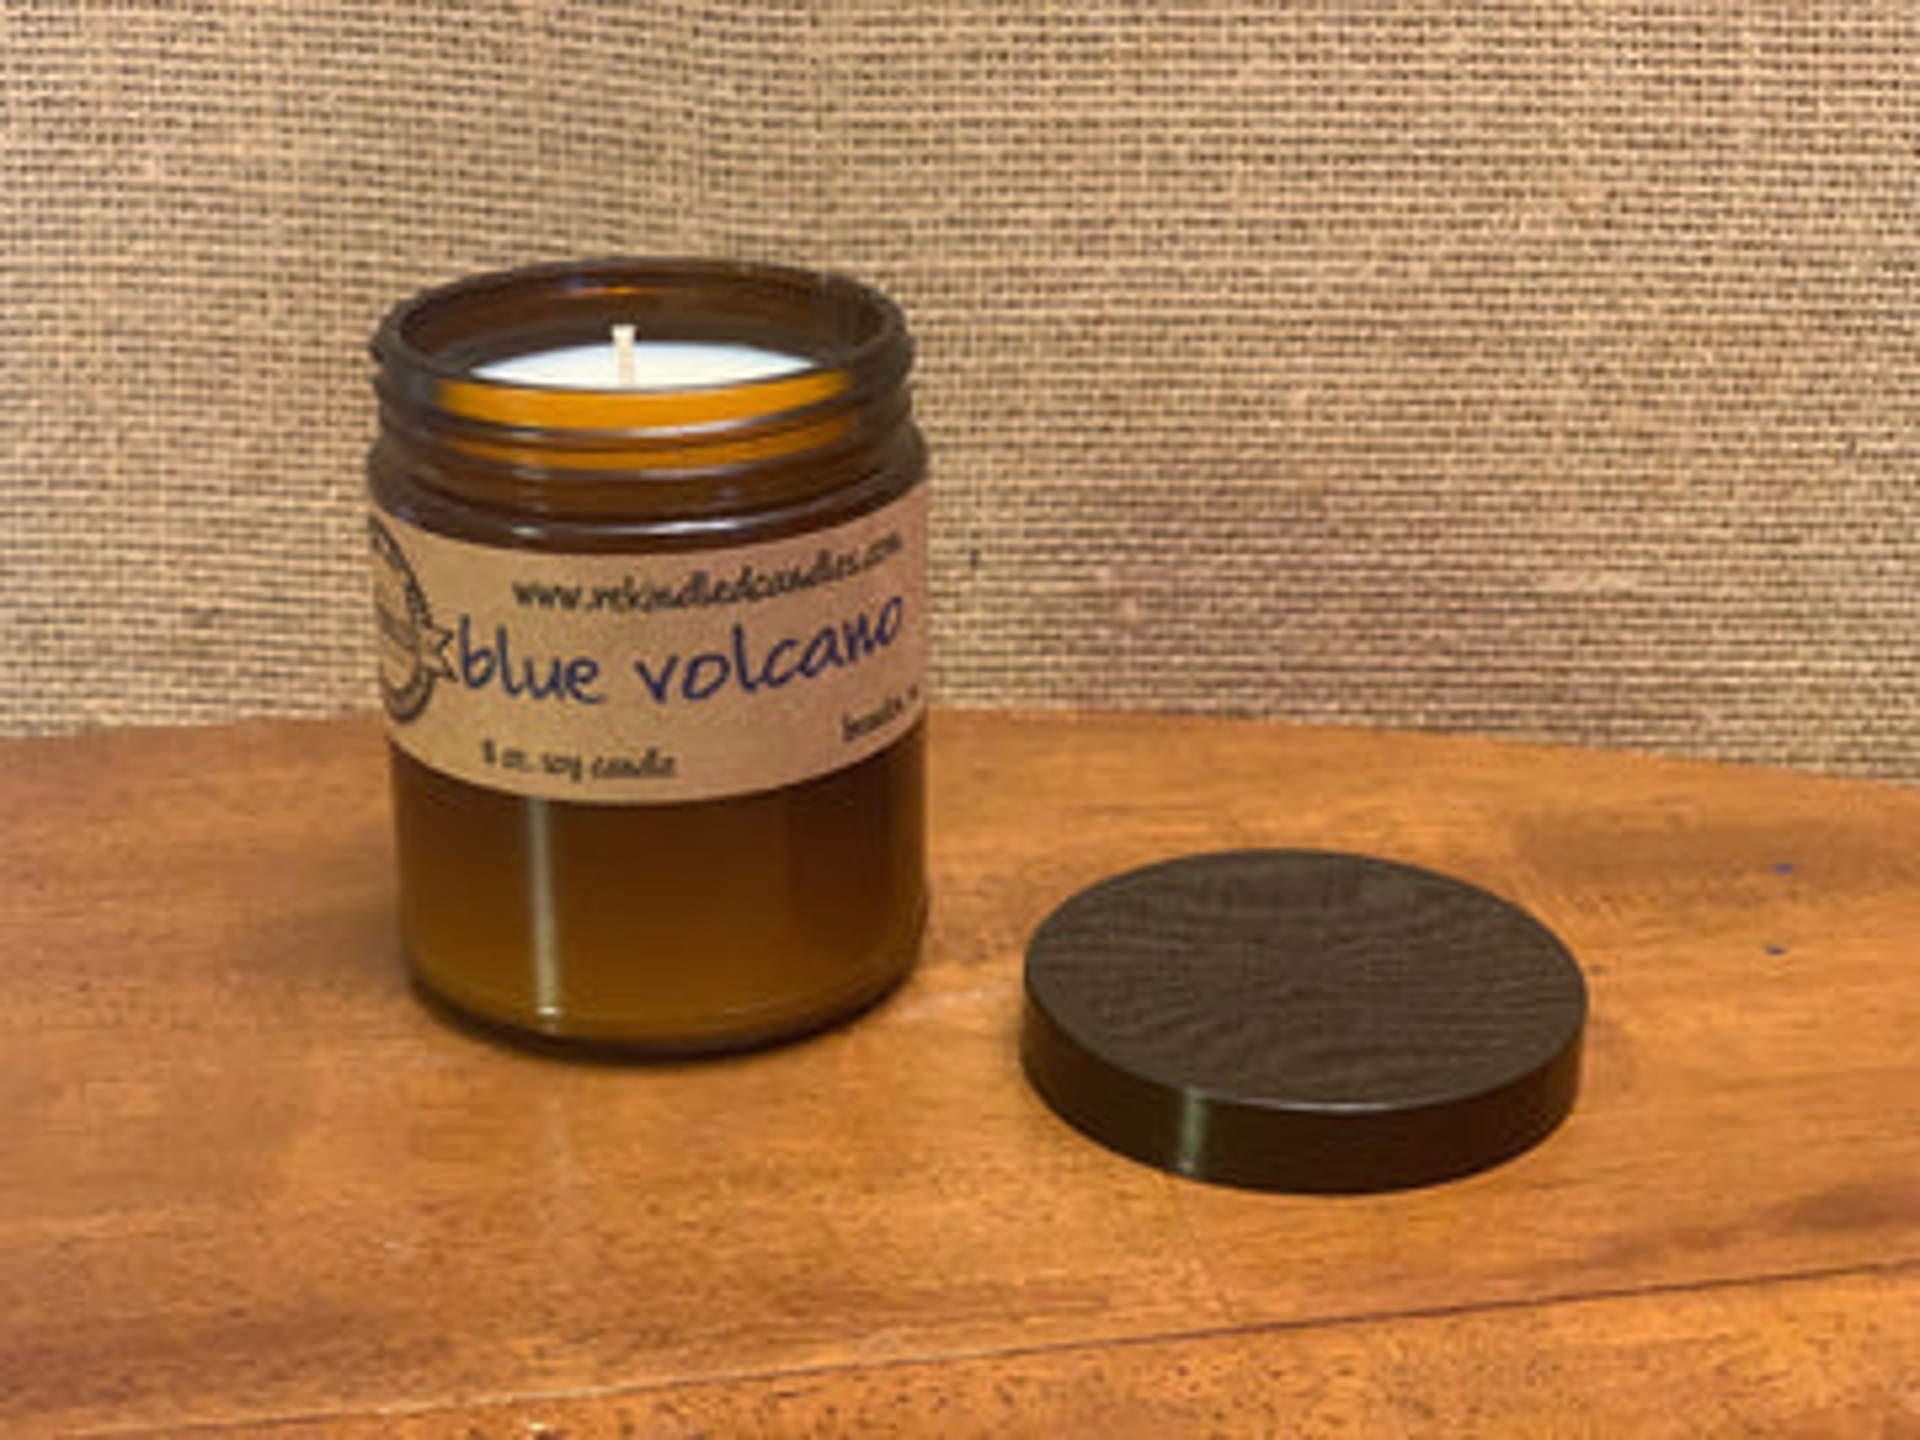 Blue Volcano Amber Jar Candle by re-kindled candle company